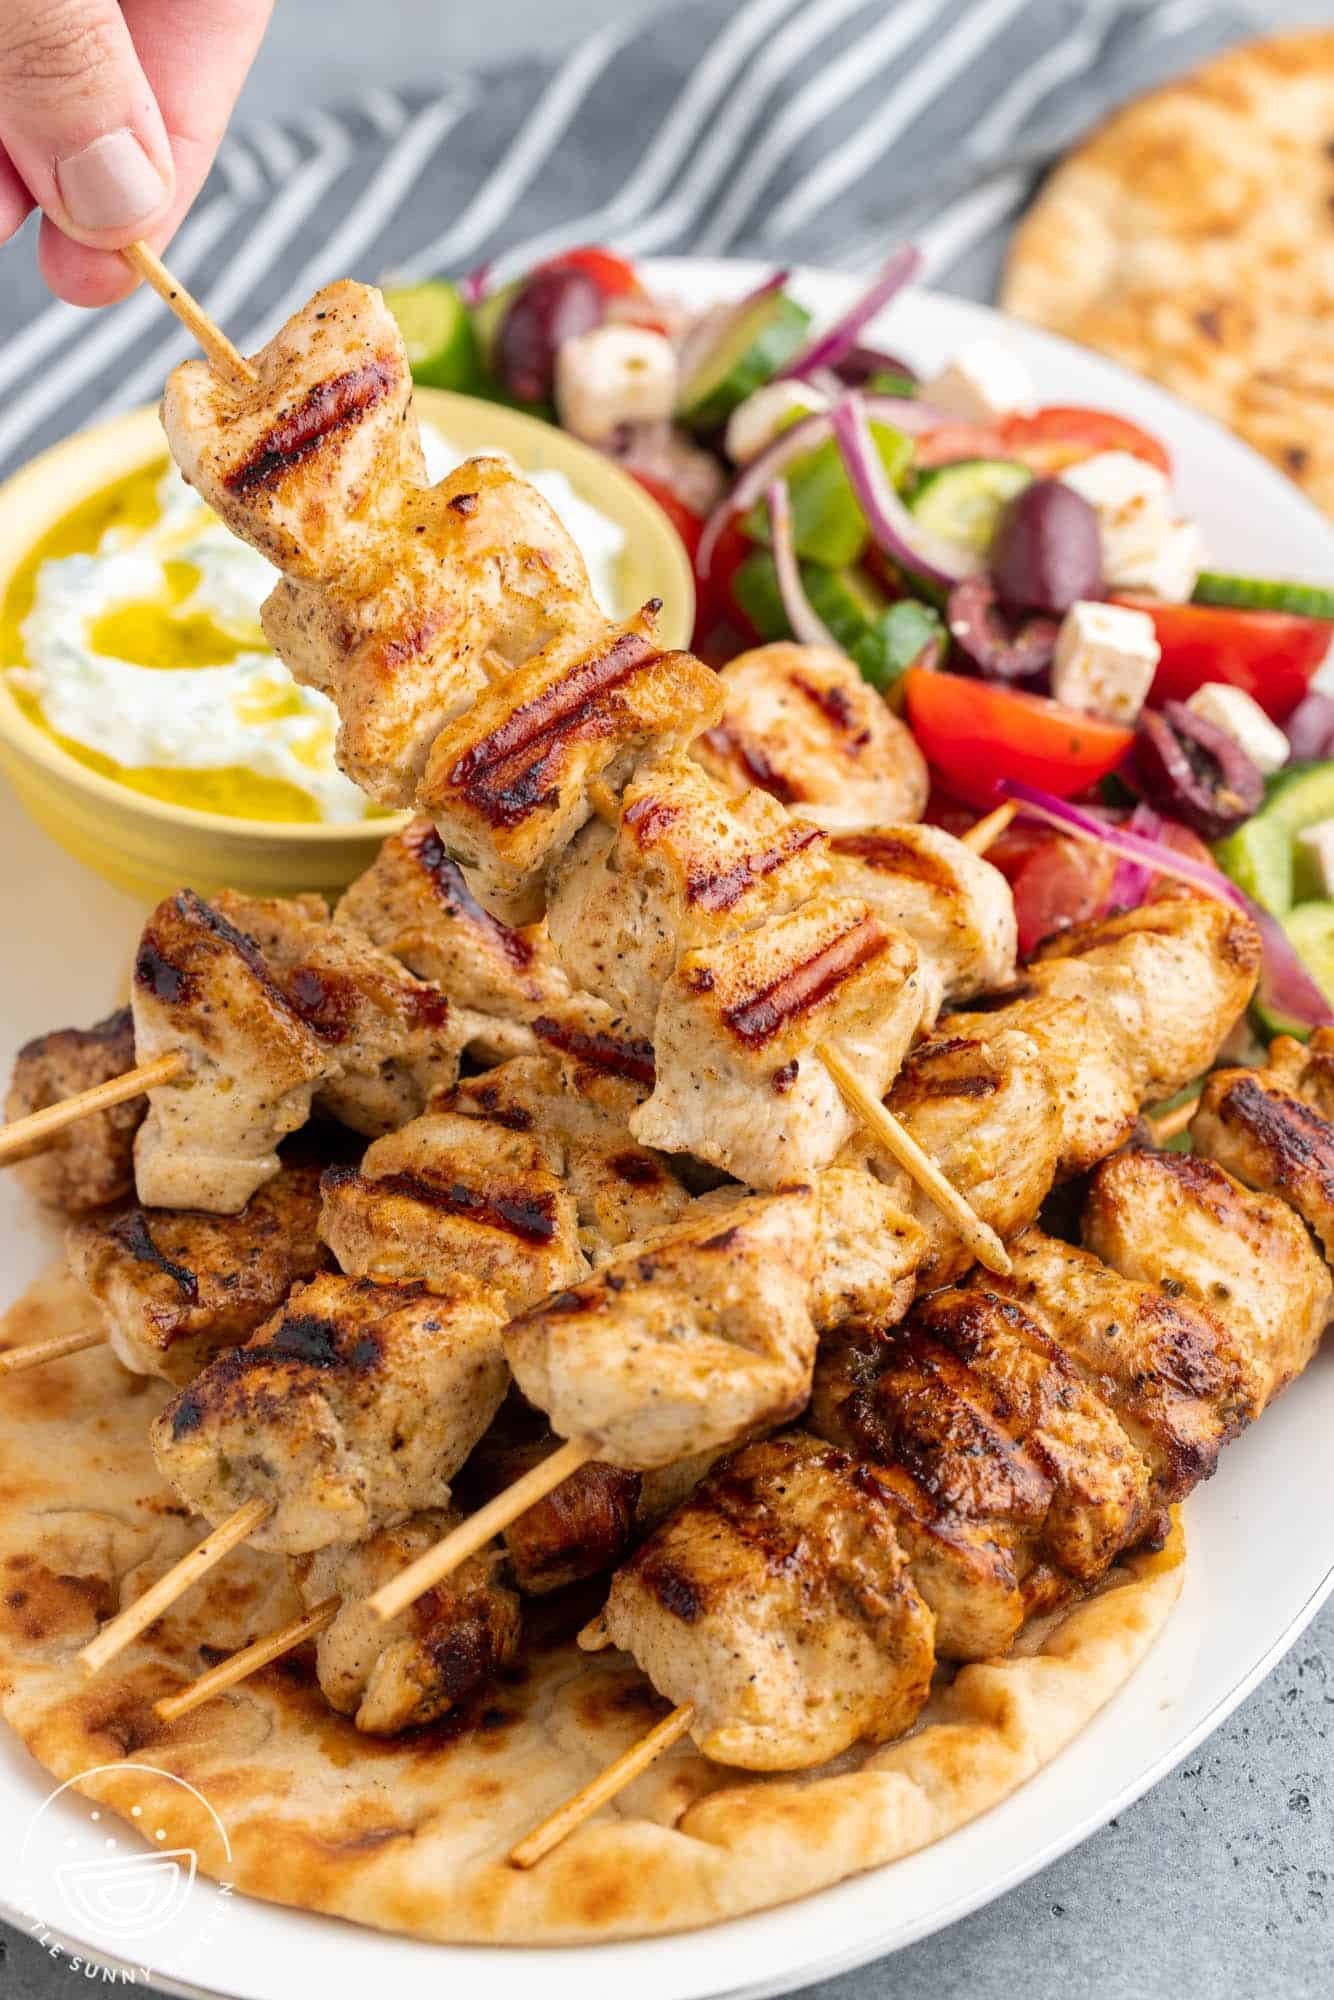 a chicken souvlaki platter. A hand is picking up a skewer of chicken from the plate.